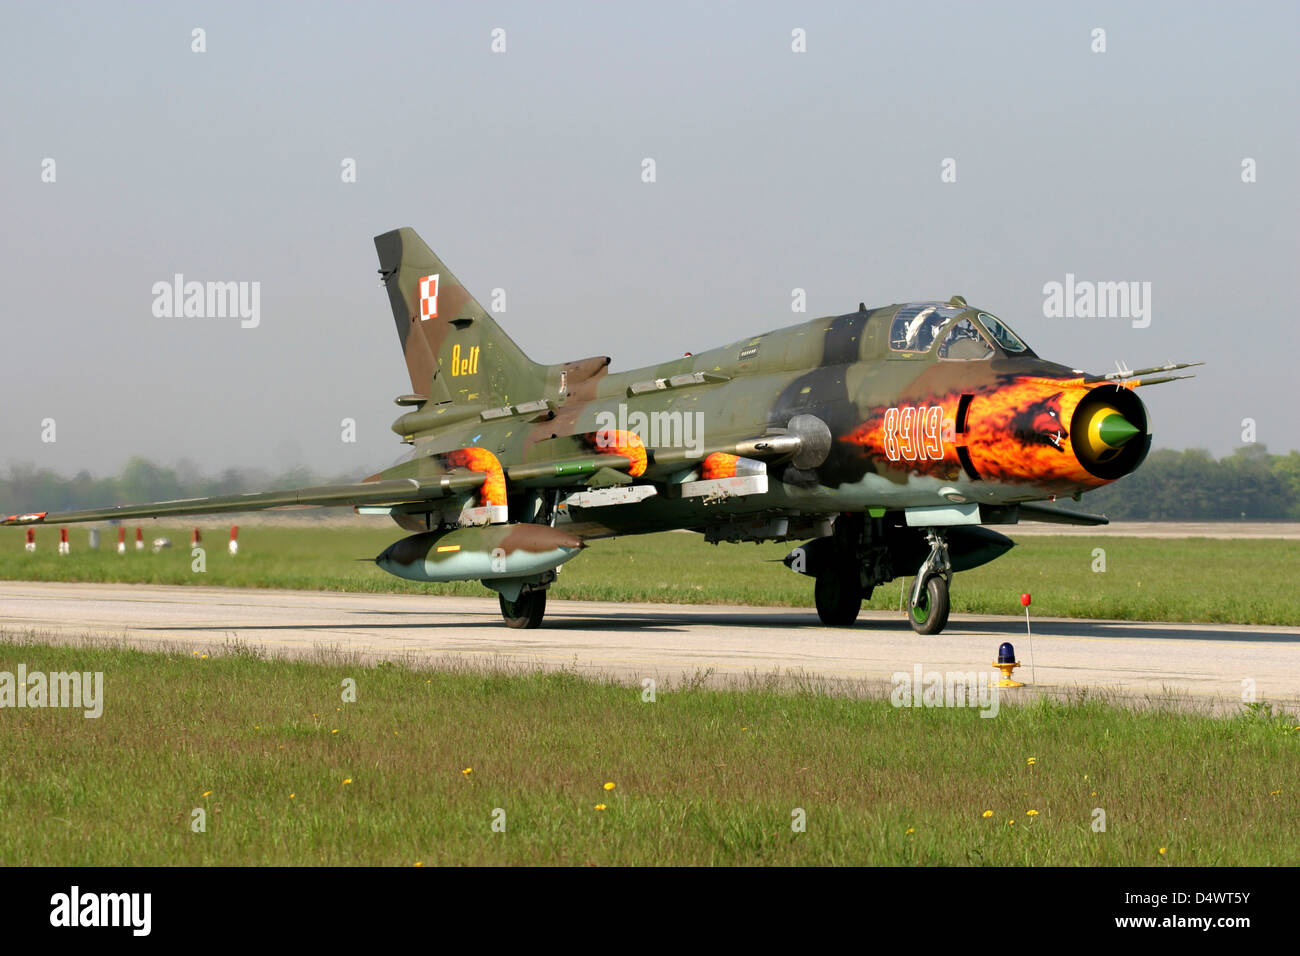 Polish Air Force Su-22 Fitter aircraft with flamboyant nose-art at Lechfeld Airbase, Germany. Stock Photo